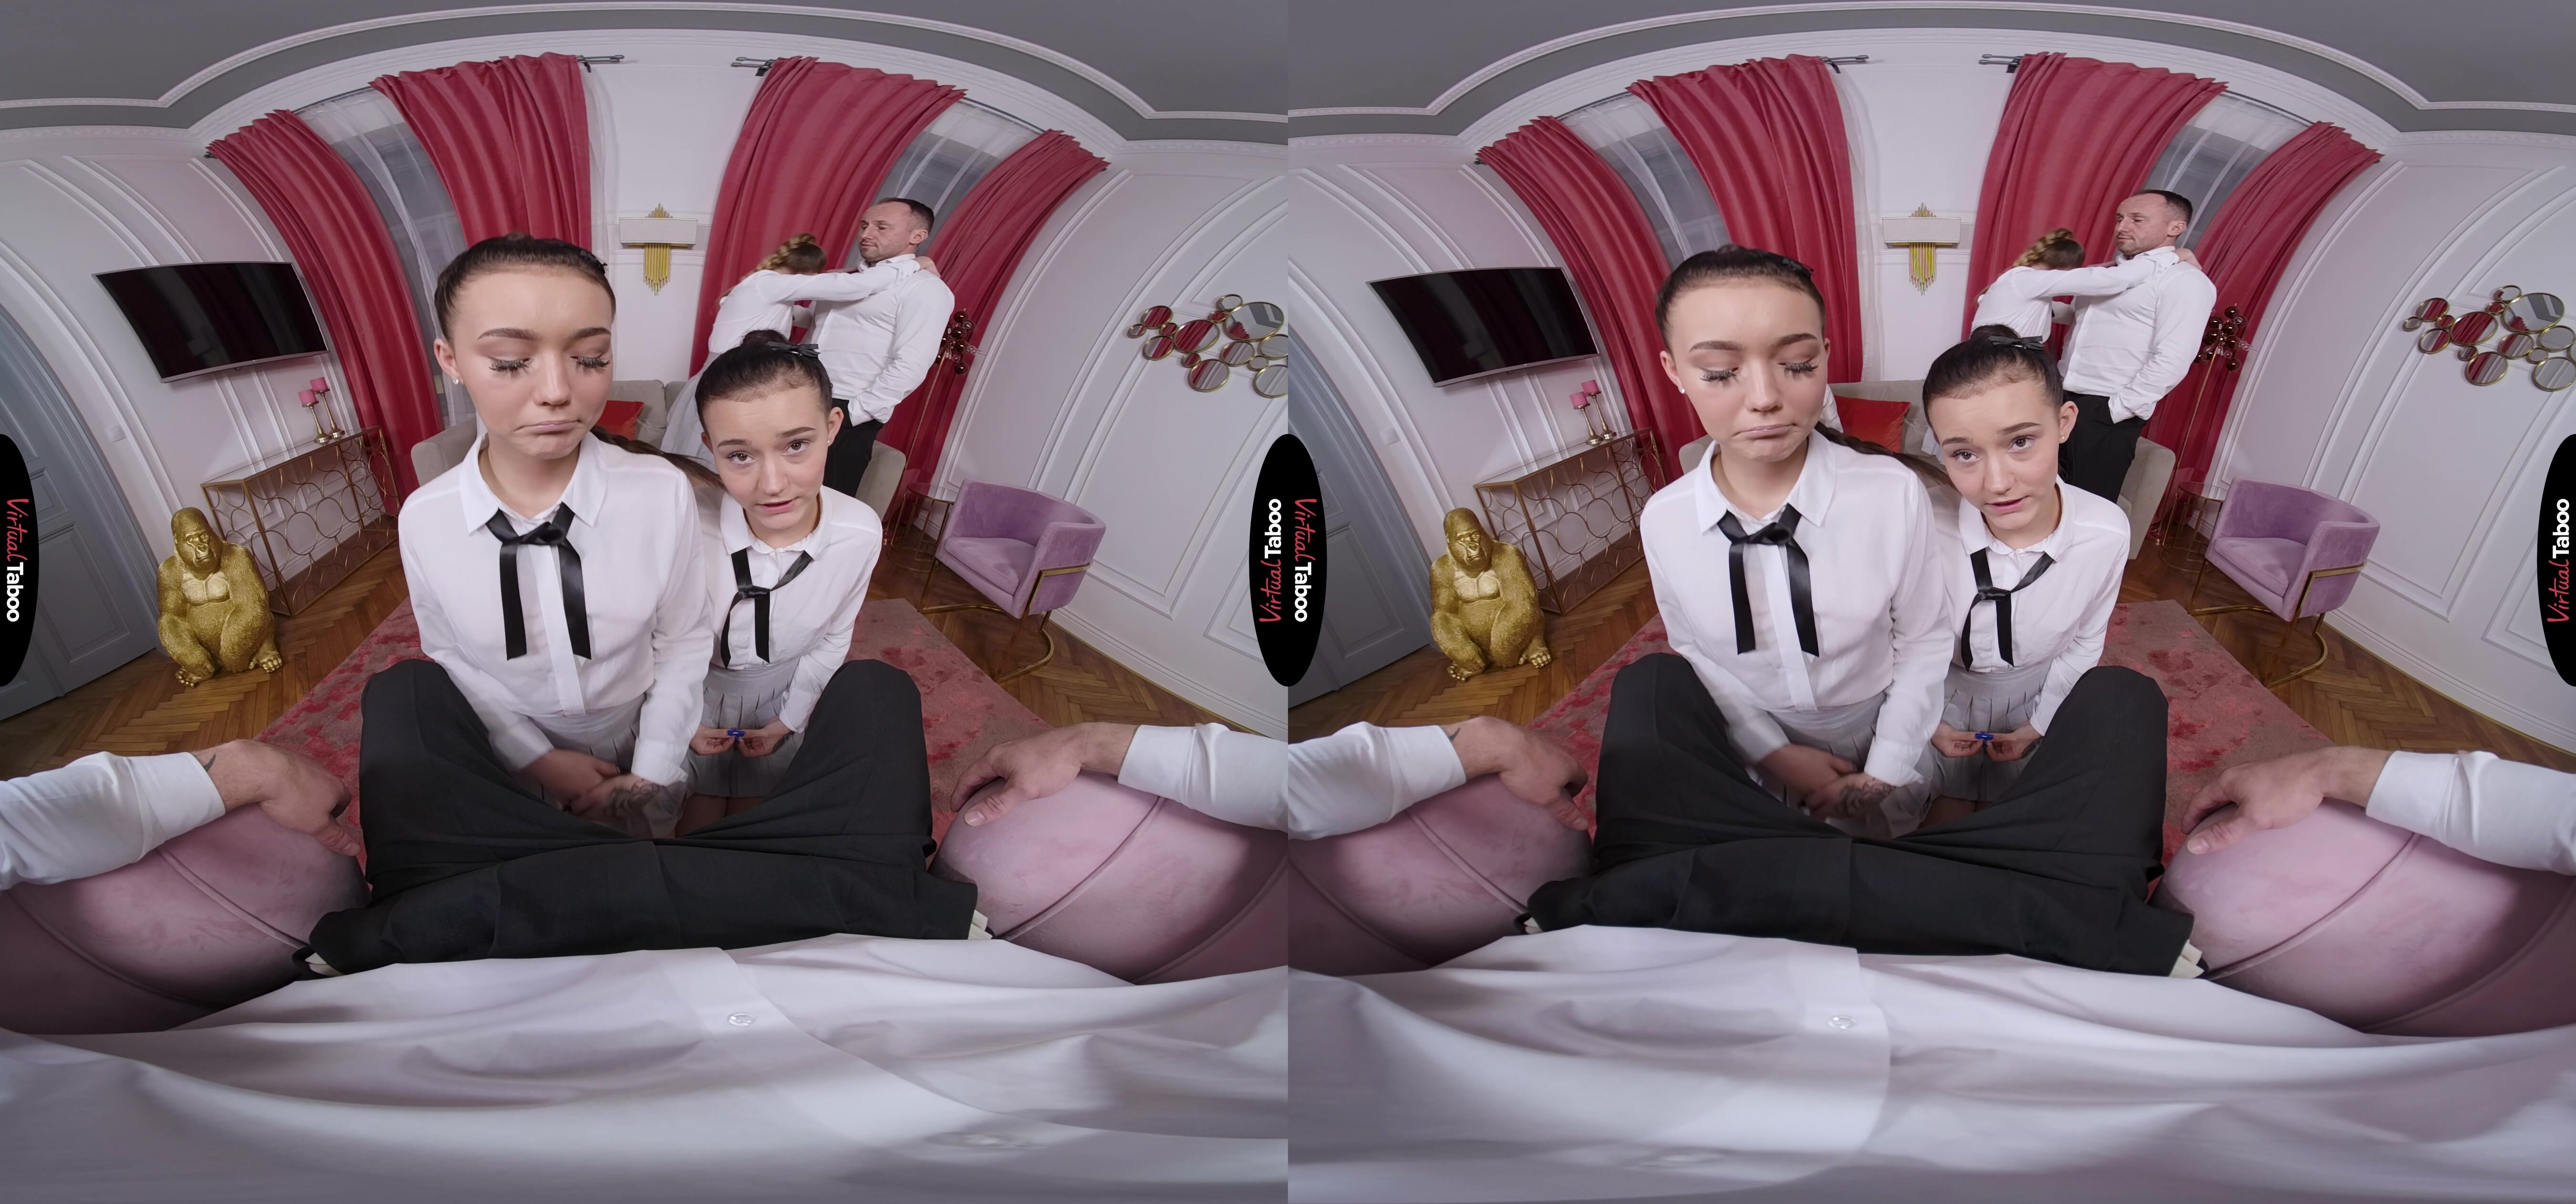 Eveline Dellai,  Silvia Dellai, Zee Twins - Yes, This Is Real: Double Twin Swap